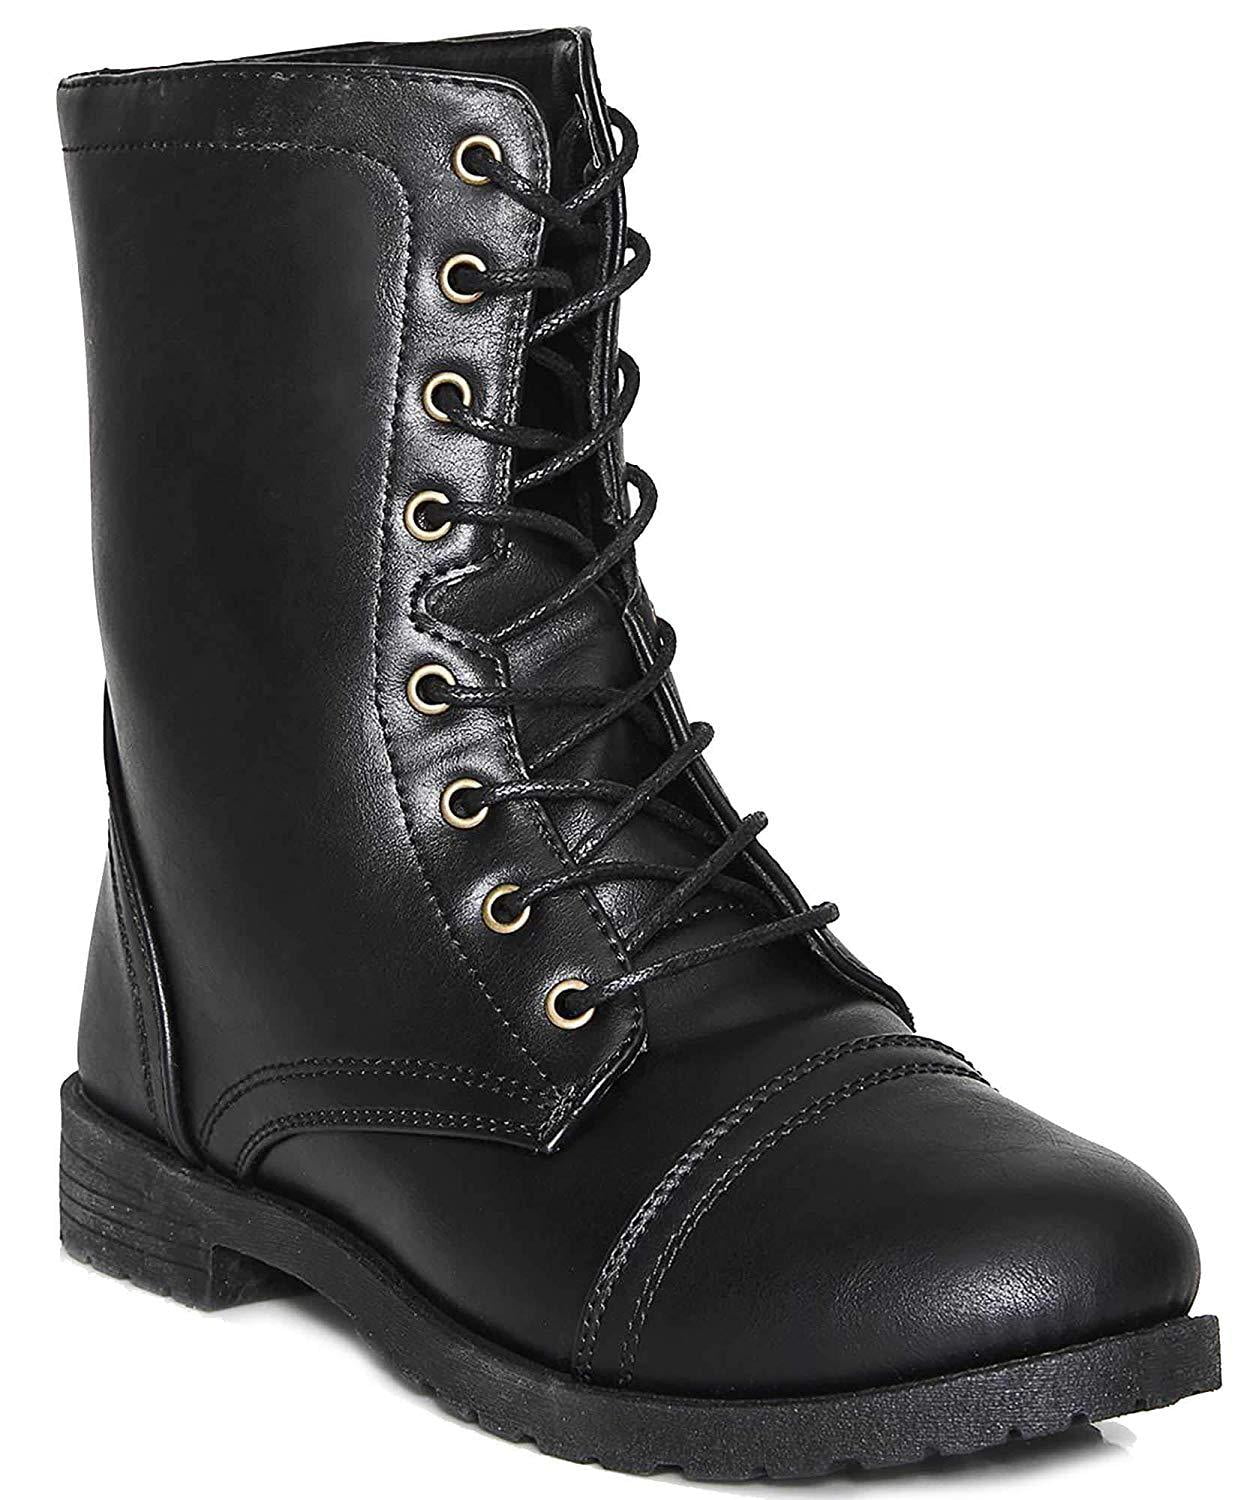 Army Lace Boots - Army Military